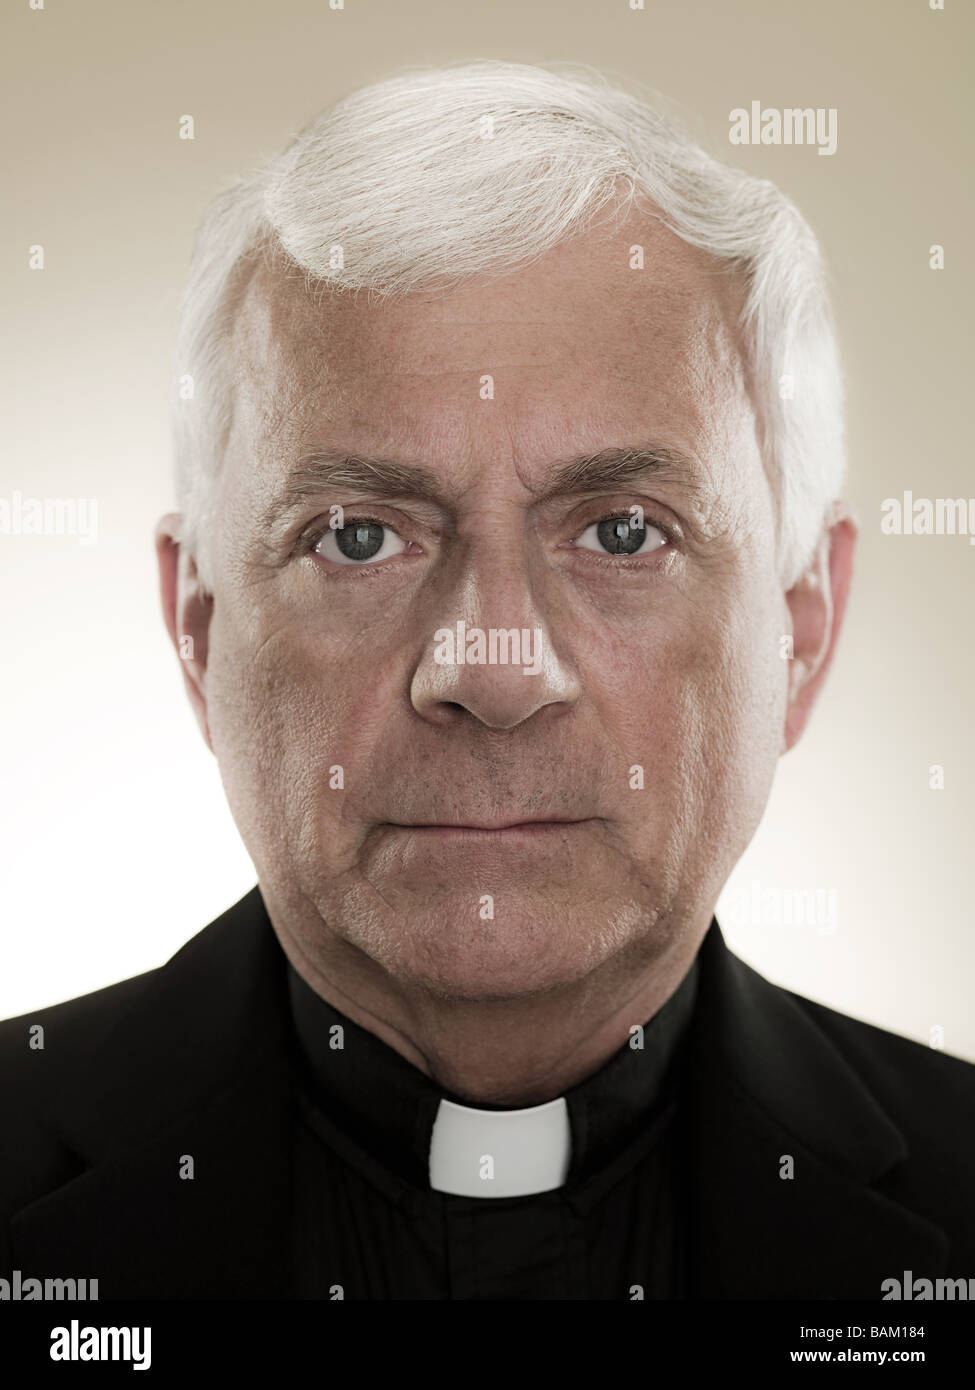 A headshot of a priest Stock Photo